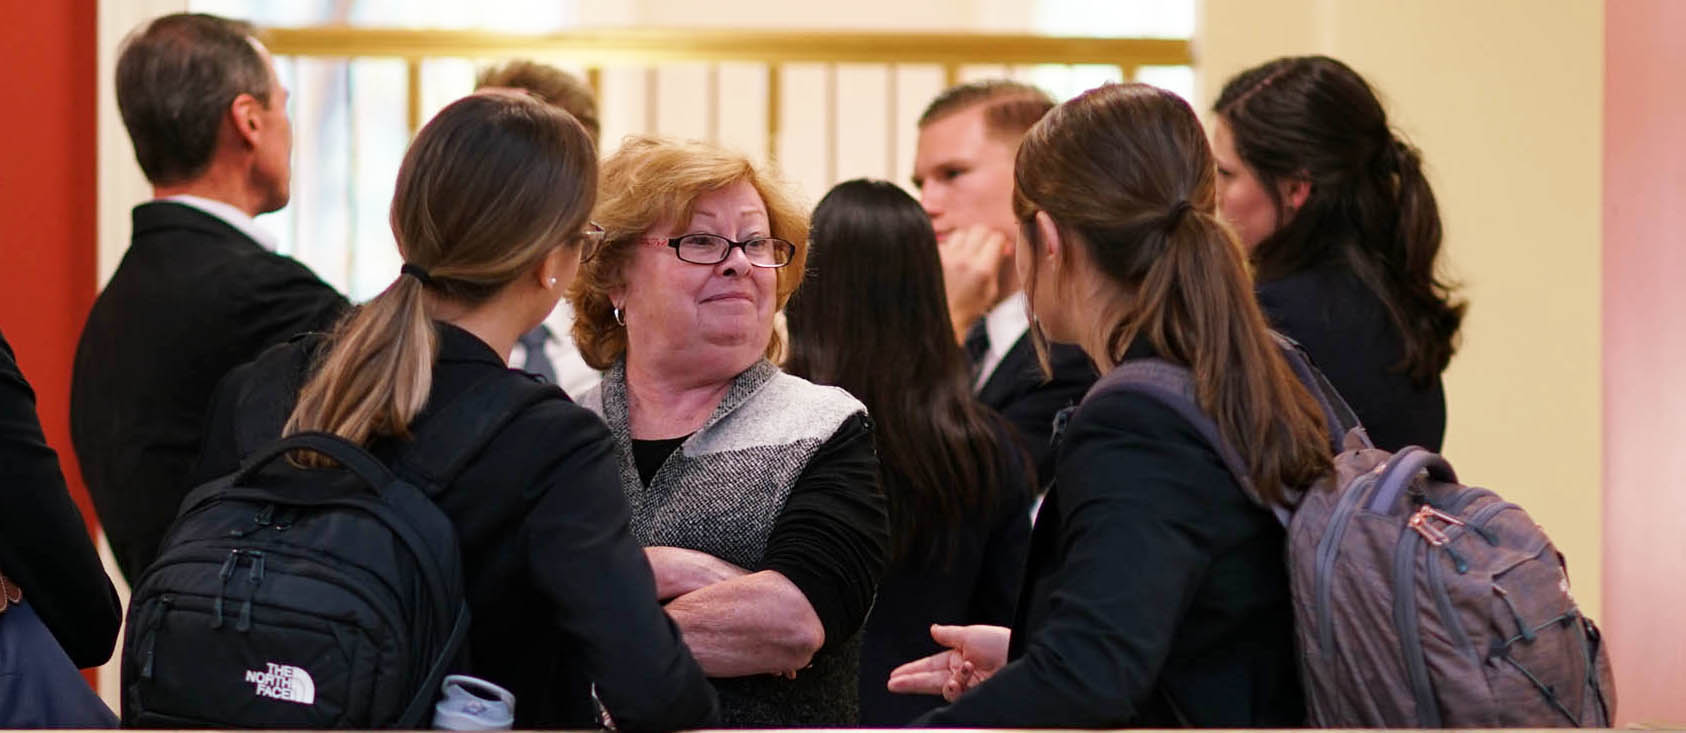  Students surround Jan Taylor after their first round in the West Monroe Partners case competition